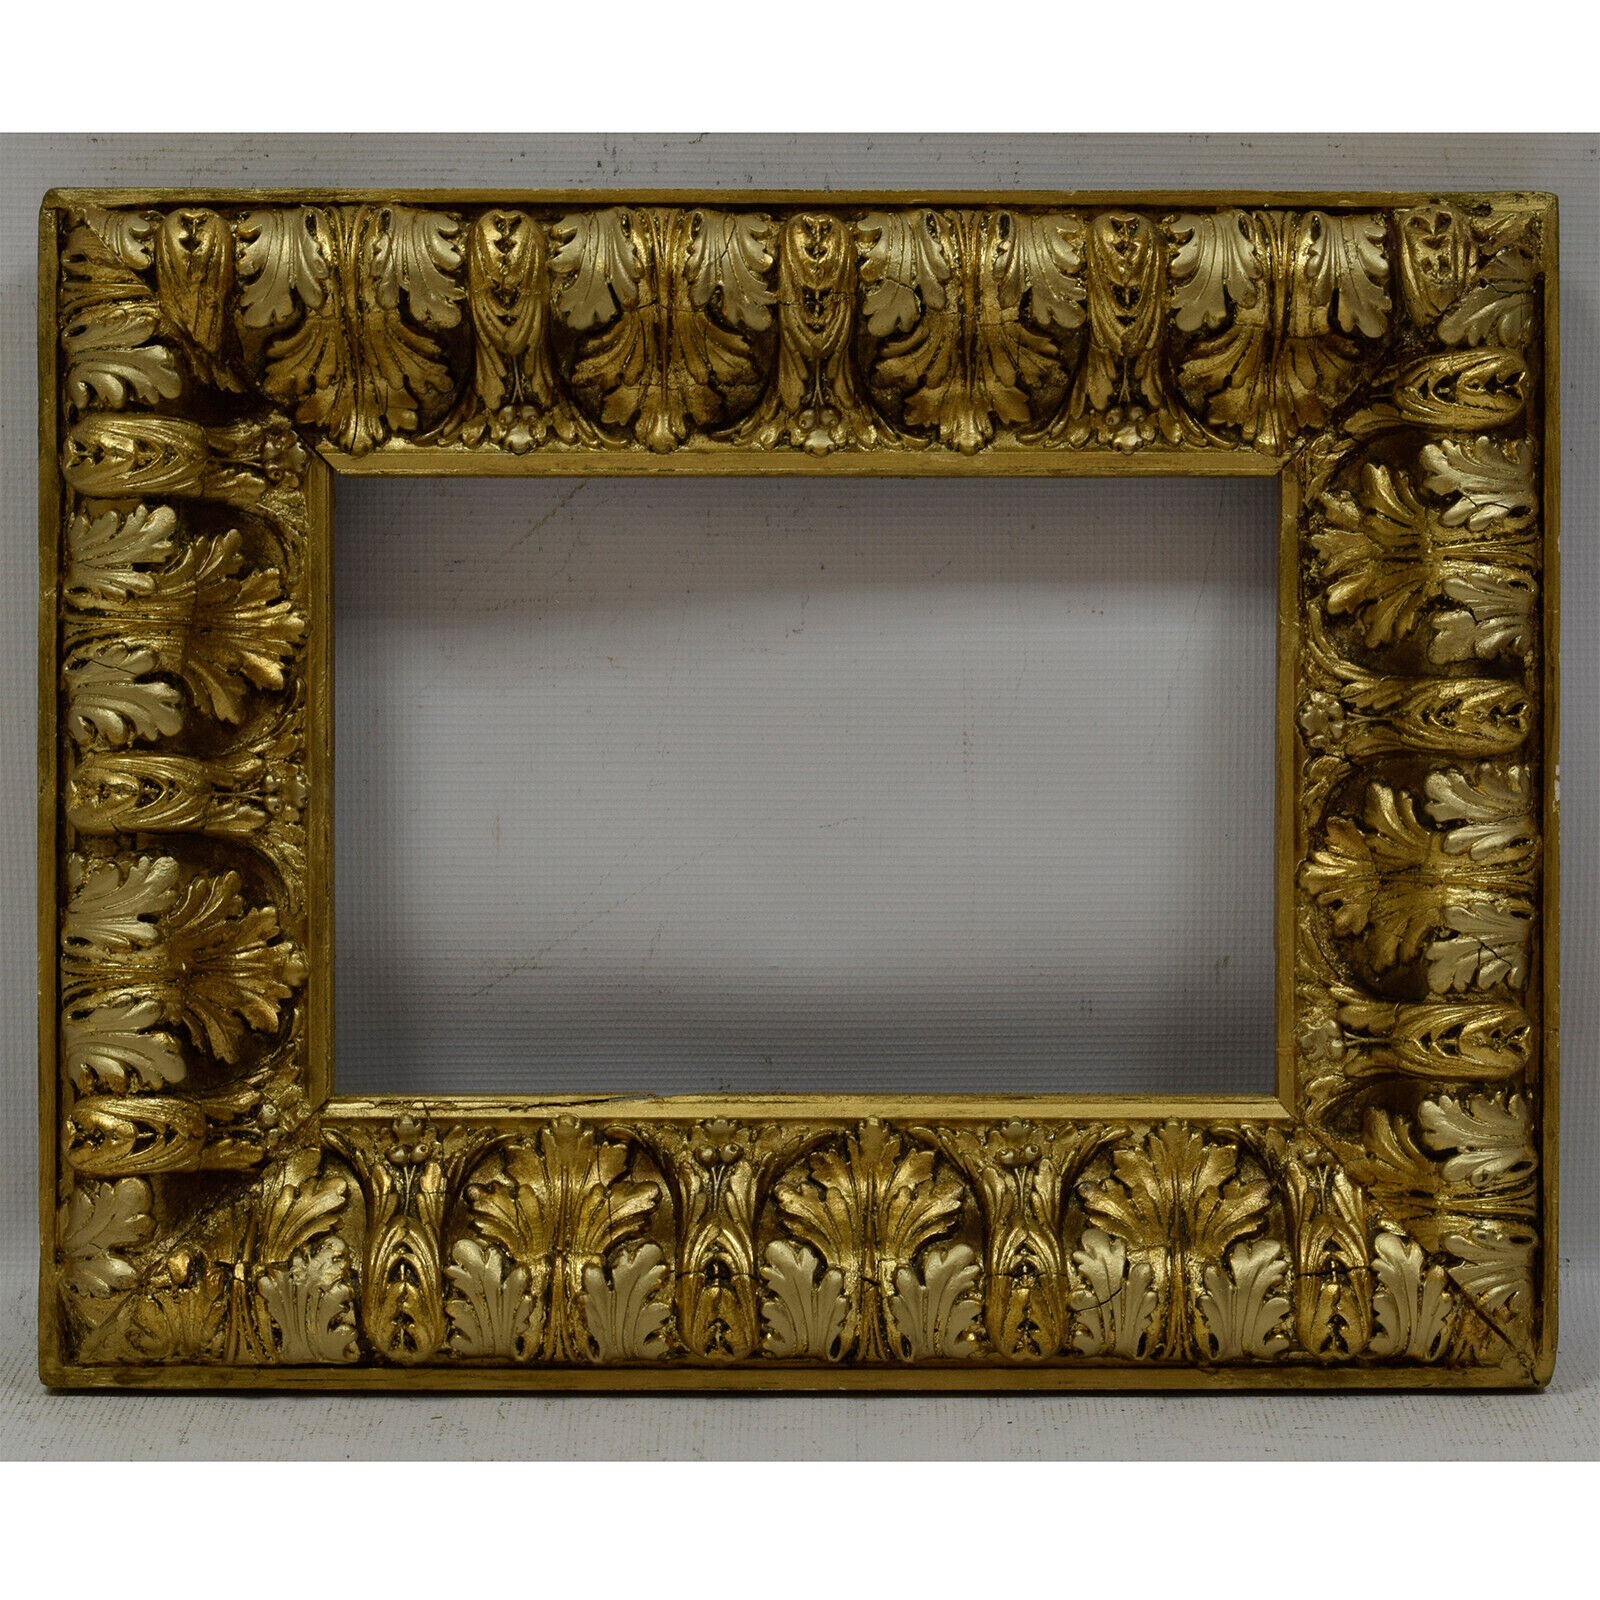 Ca.1850-1900 Old wooden frame decorative with metal leaf Internal: 12.9x8.4 in